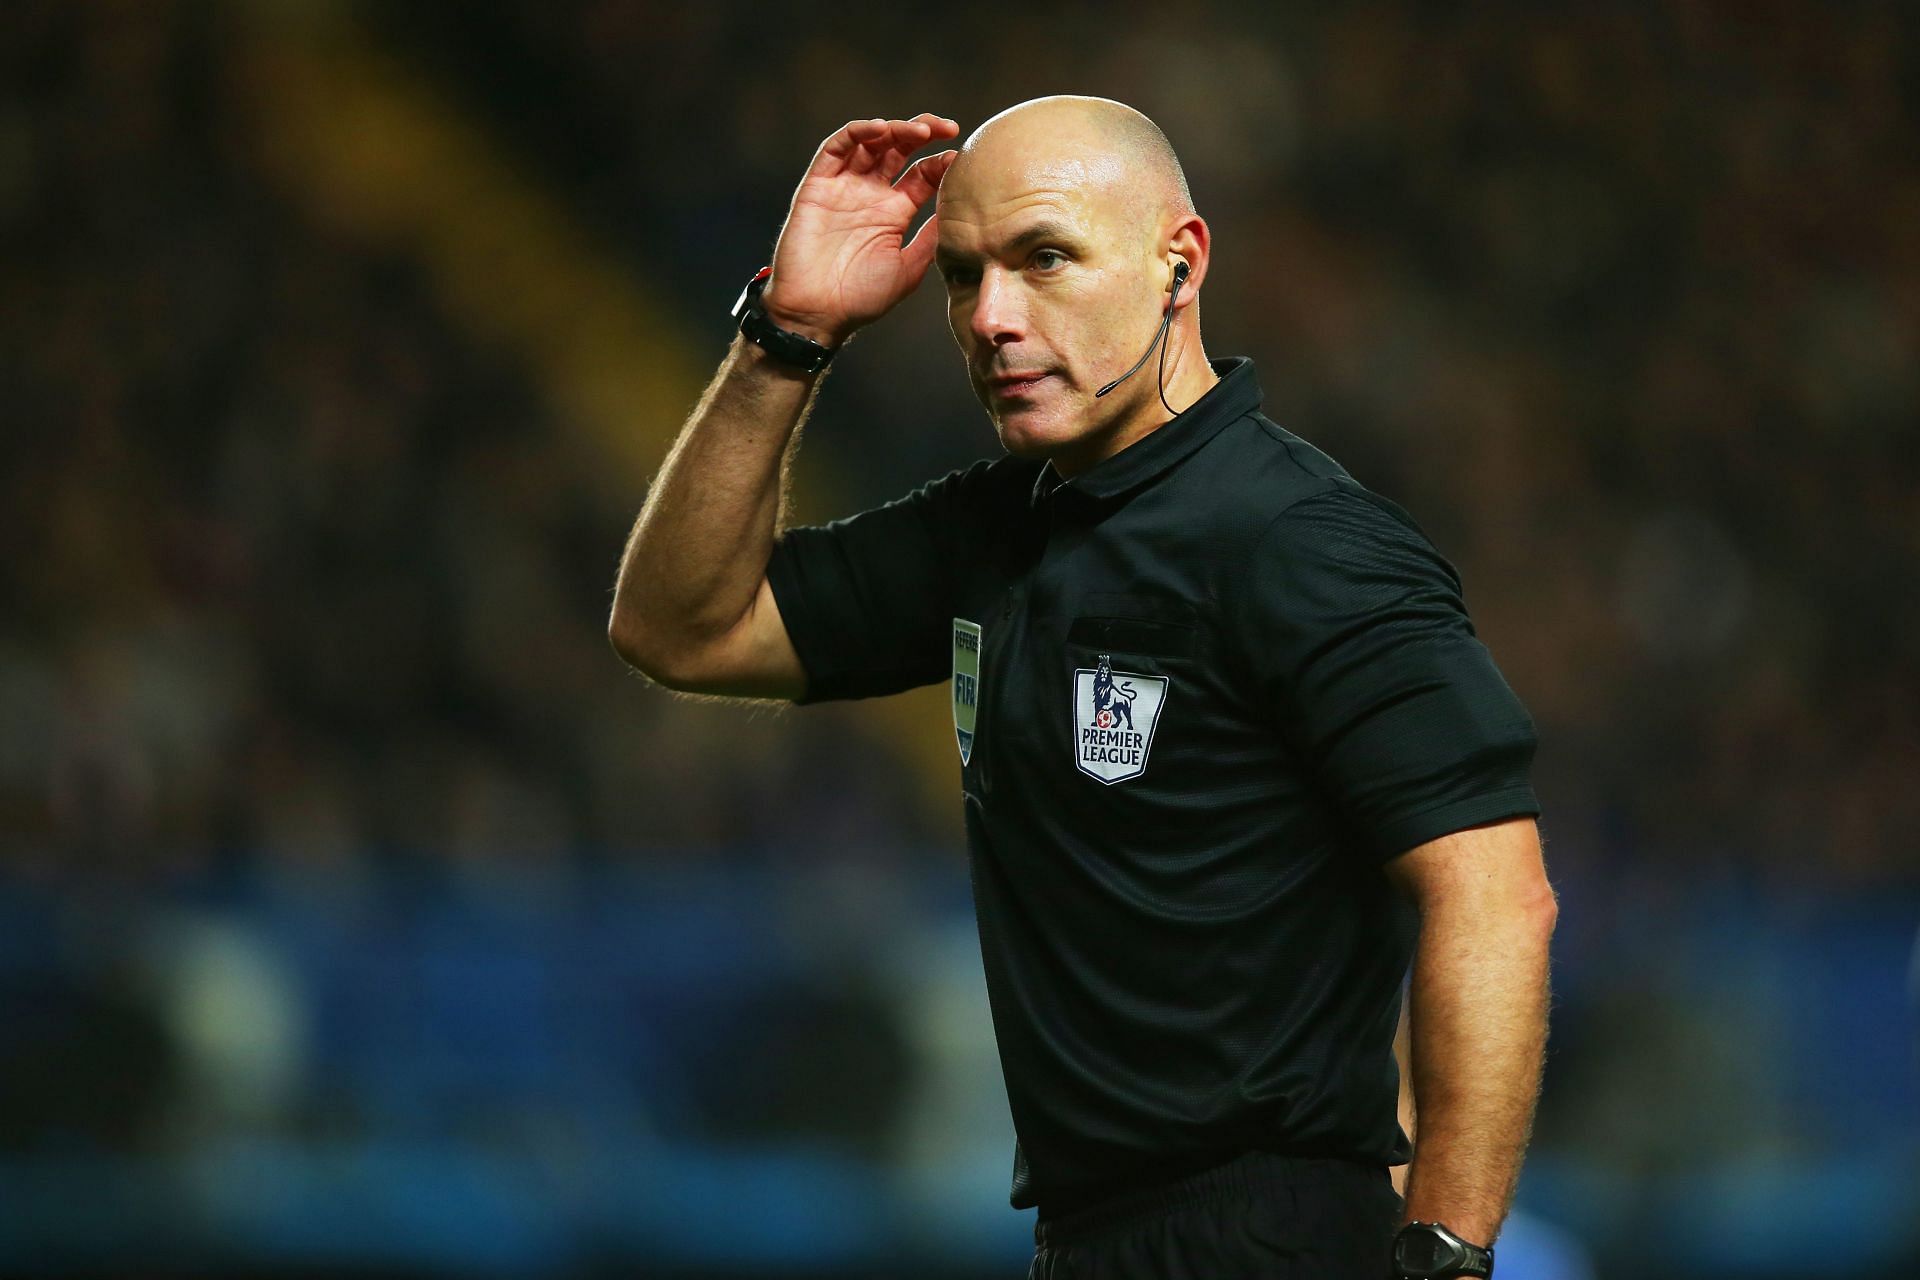 Referee Howard Webb looks on during the Barclays Premier League match between Chelsea and Liverpool at Stamford Bridge on December 29, 2013.